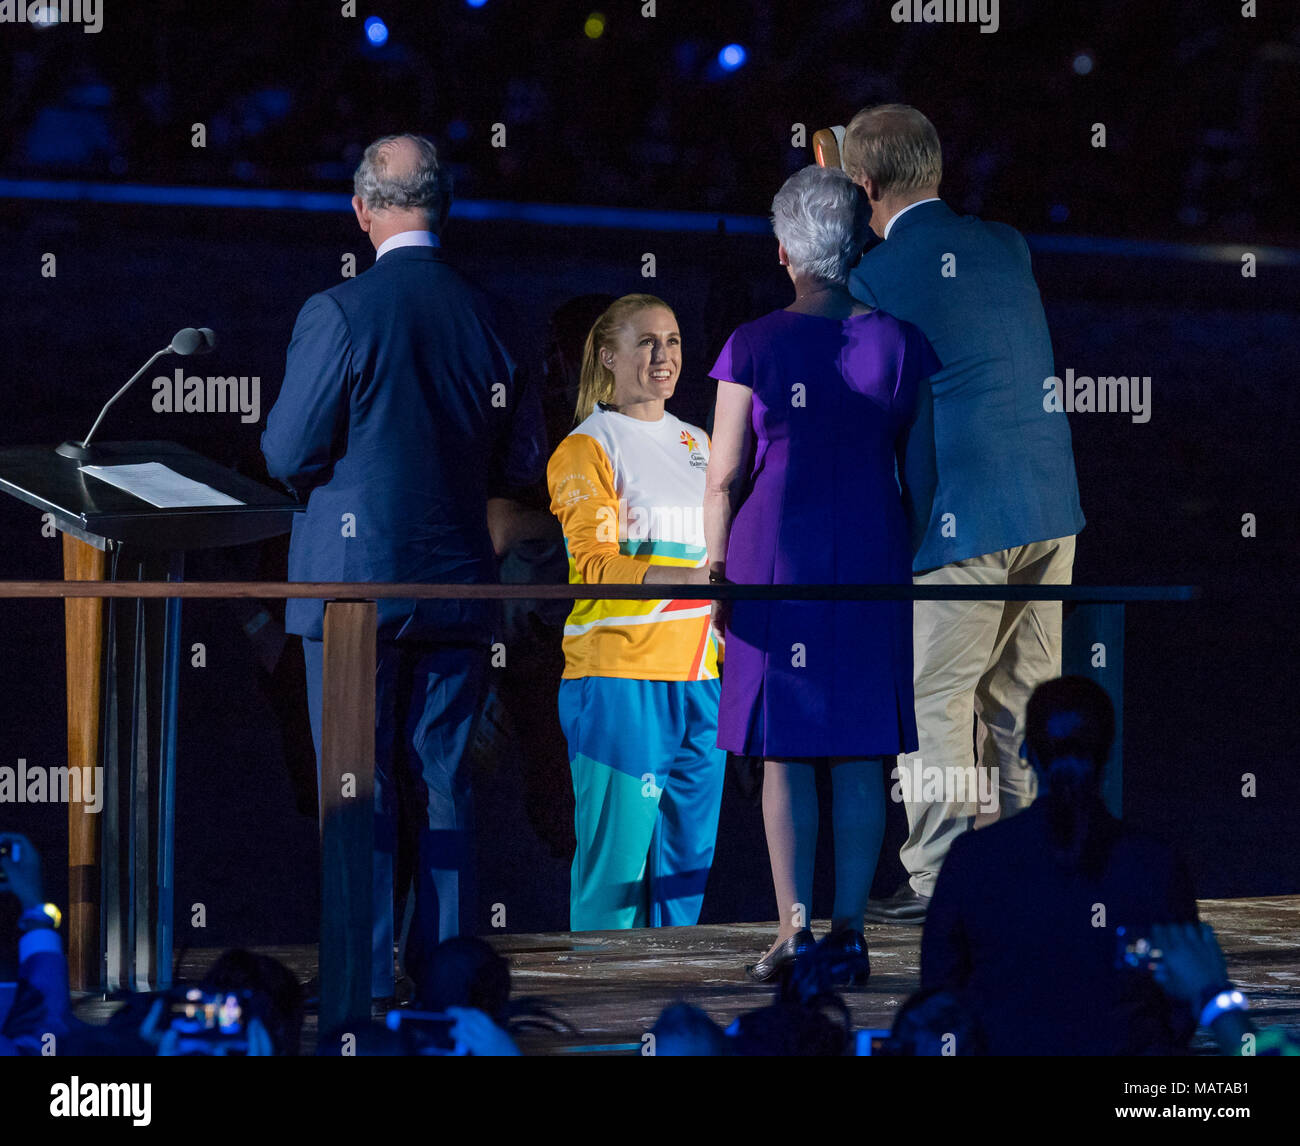 Gold Coast, Australia. 4th Apr, 2018. Sally Pearson hands over the Queens baton during the 2018 Commonwealth Games Opening Ceremony on April 4, 2018 in Gold Coast, Australia. Credit: Gary Mitchell, GMP Media/Alamy Live News Stock Photo